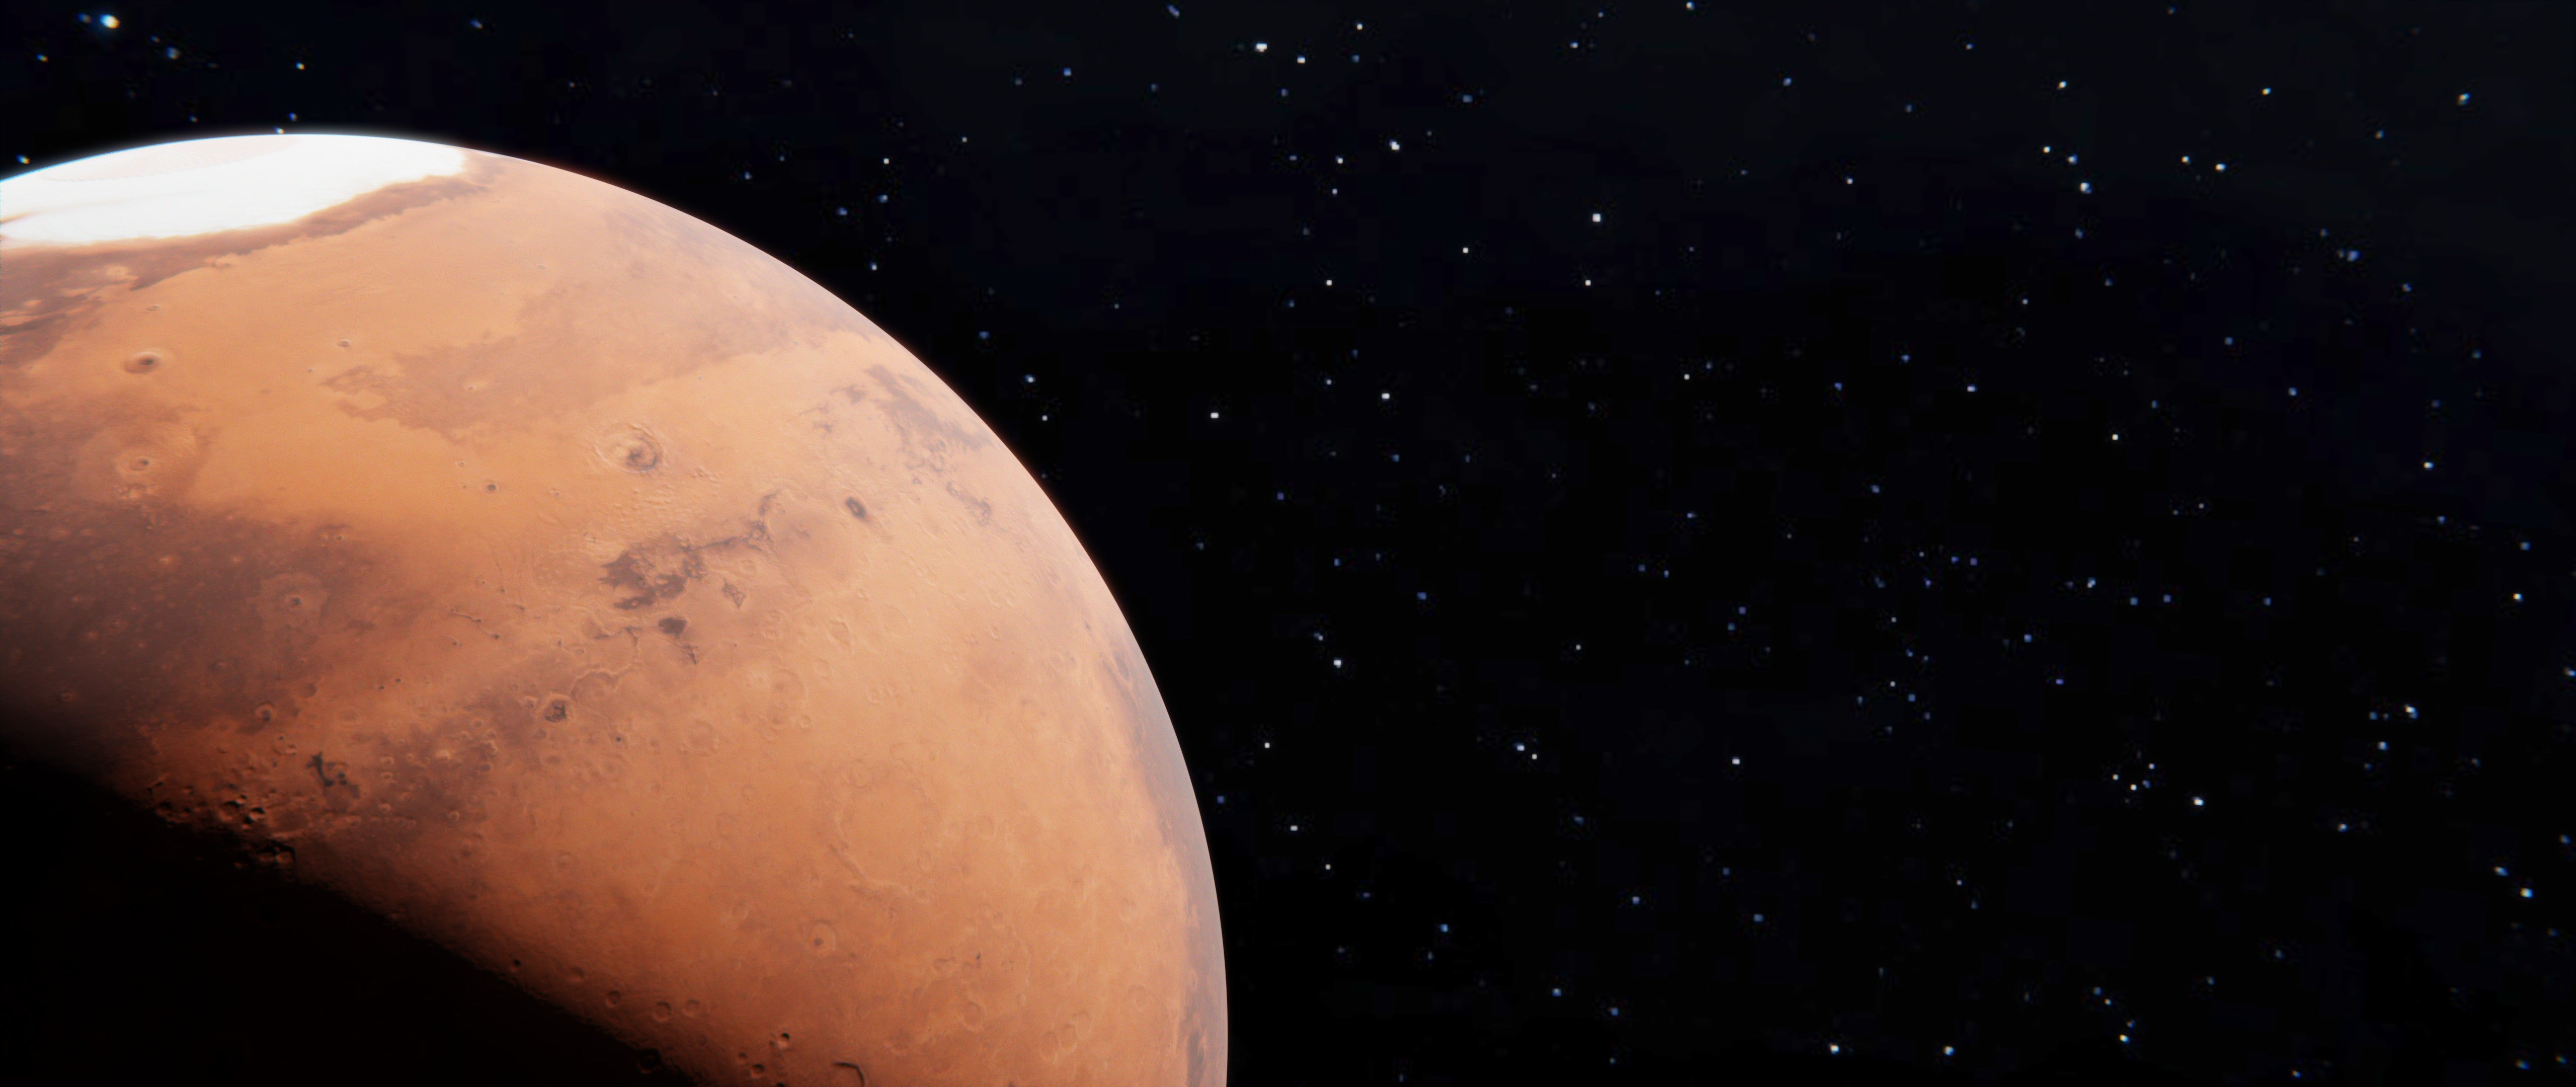 Mars 4K wallpapers for your desktop or mobile screen free and easy to ...